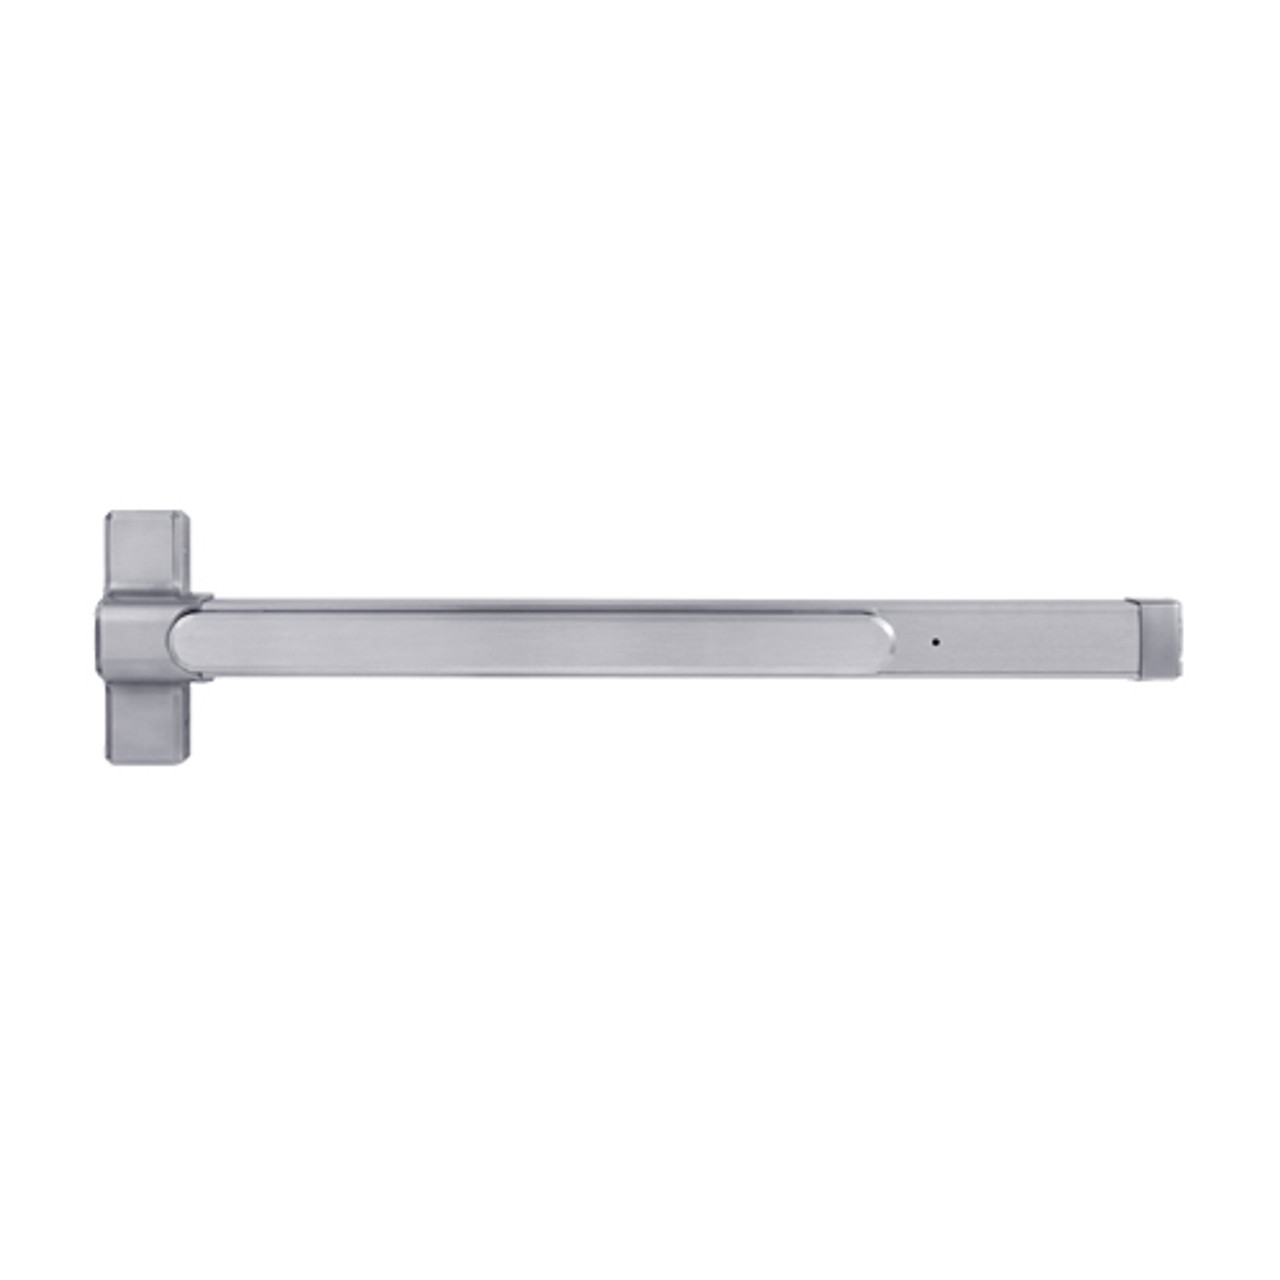 QED129X-36-8-626 Stanley QED100 Series Heavy Duty Concealed Vertical Rod Fire Rated Exit Device in Satin Chrome Finish